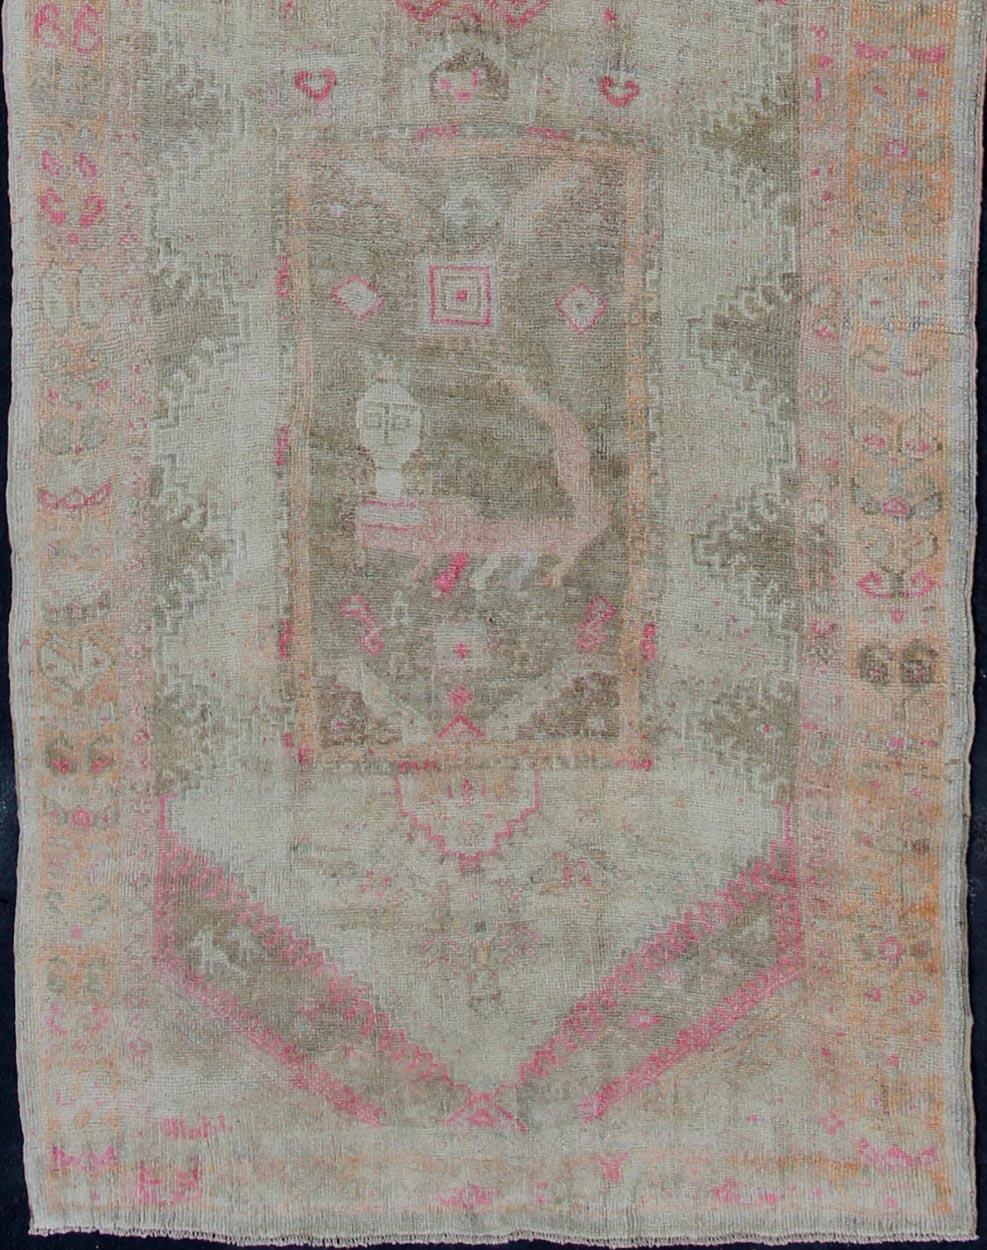 Long vintage runner, wide vintage runner from Turkey with vertical medallion design in green, purple, gray, pale orange and nude rug en-176012, country of origin / type: Turkey / Oushak, circa 1940.

This beautiful vintage Oushak runner from 1940s